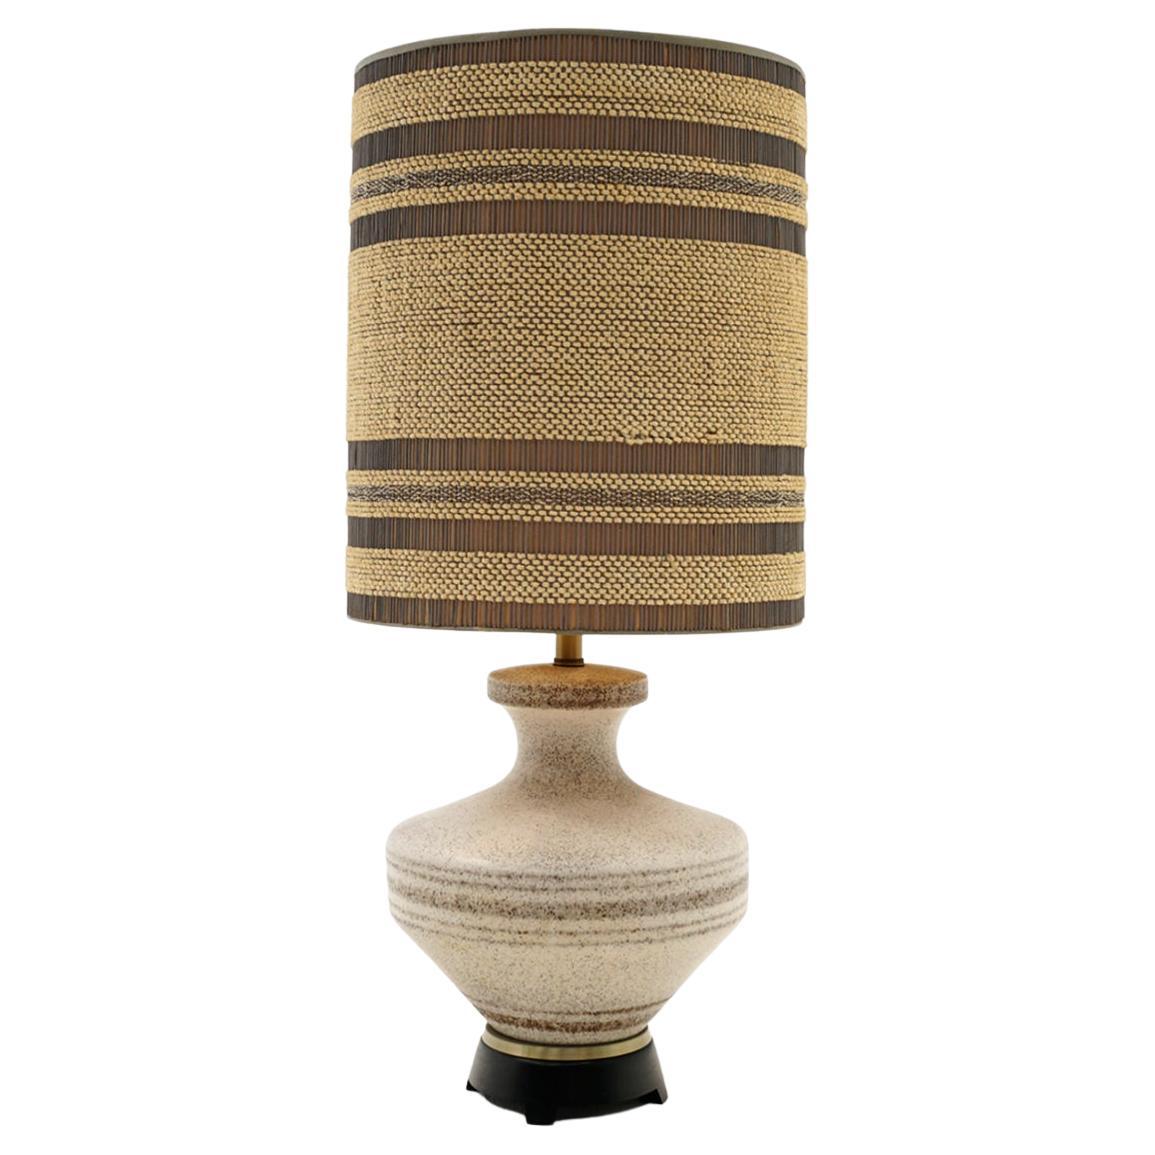 Ceramic table lamp with the original shade that when lit looks like a shade within the shade.  No chips, cracks or repairs.  Holds three light bulbs.  Very high quality in the style of Gordon and Jane Martz for Marshall Studios.